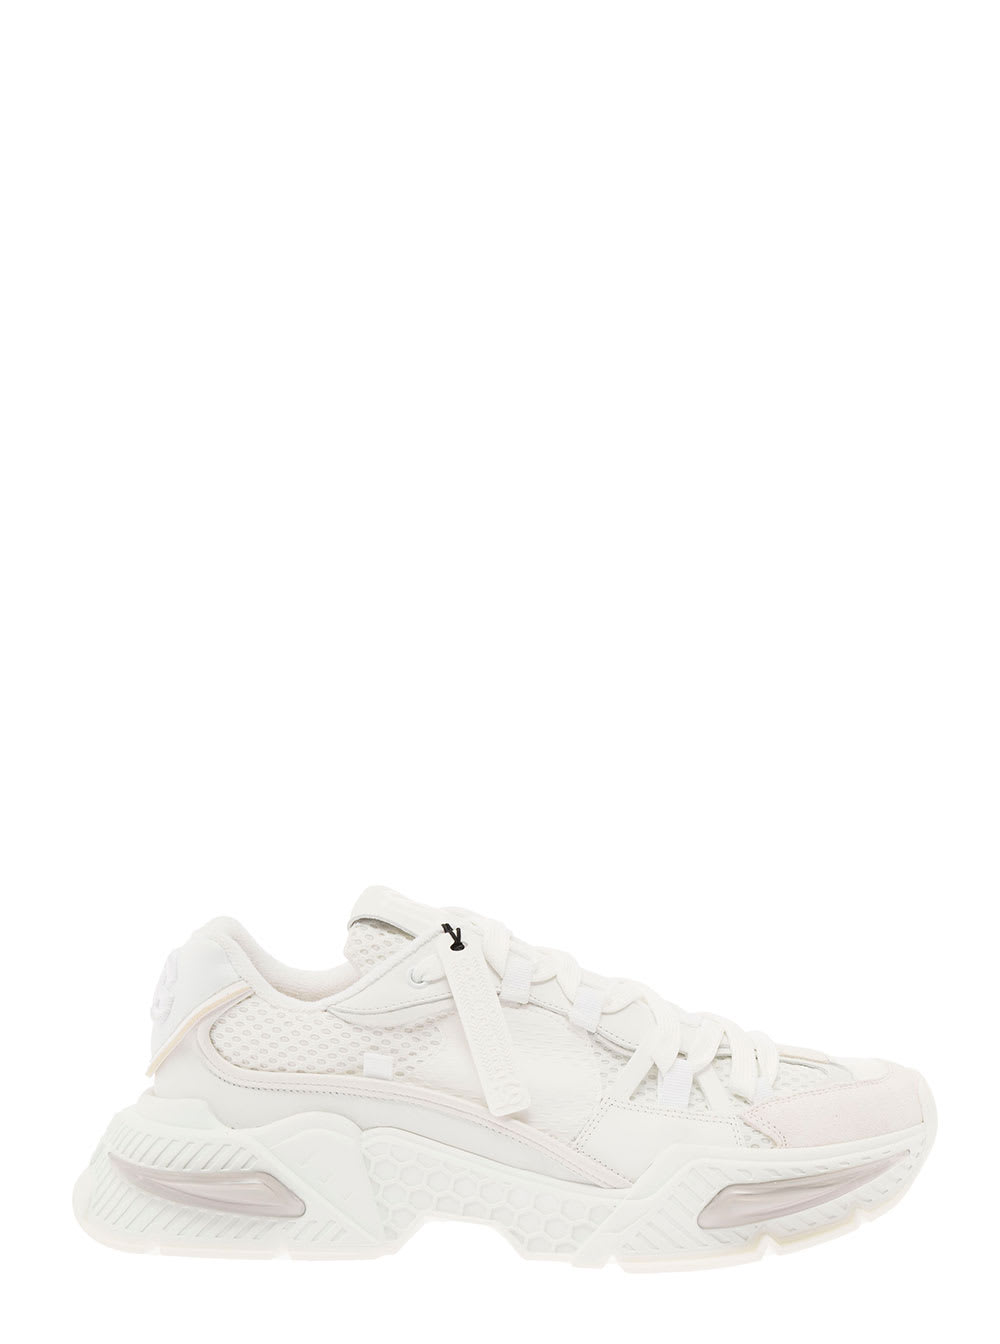 Auirmaster White Sneakers In Nylon, leather And Suede Dolce & Gabbana Man